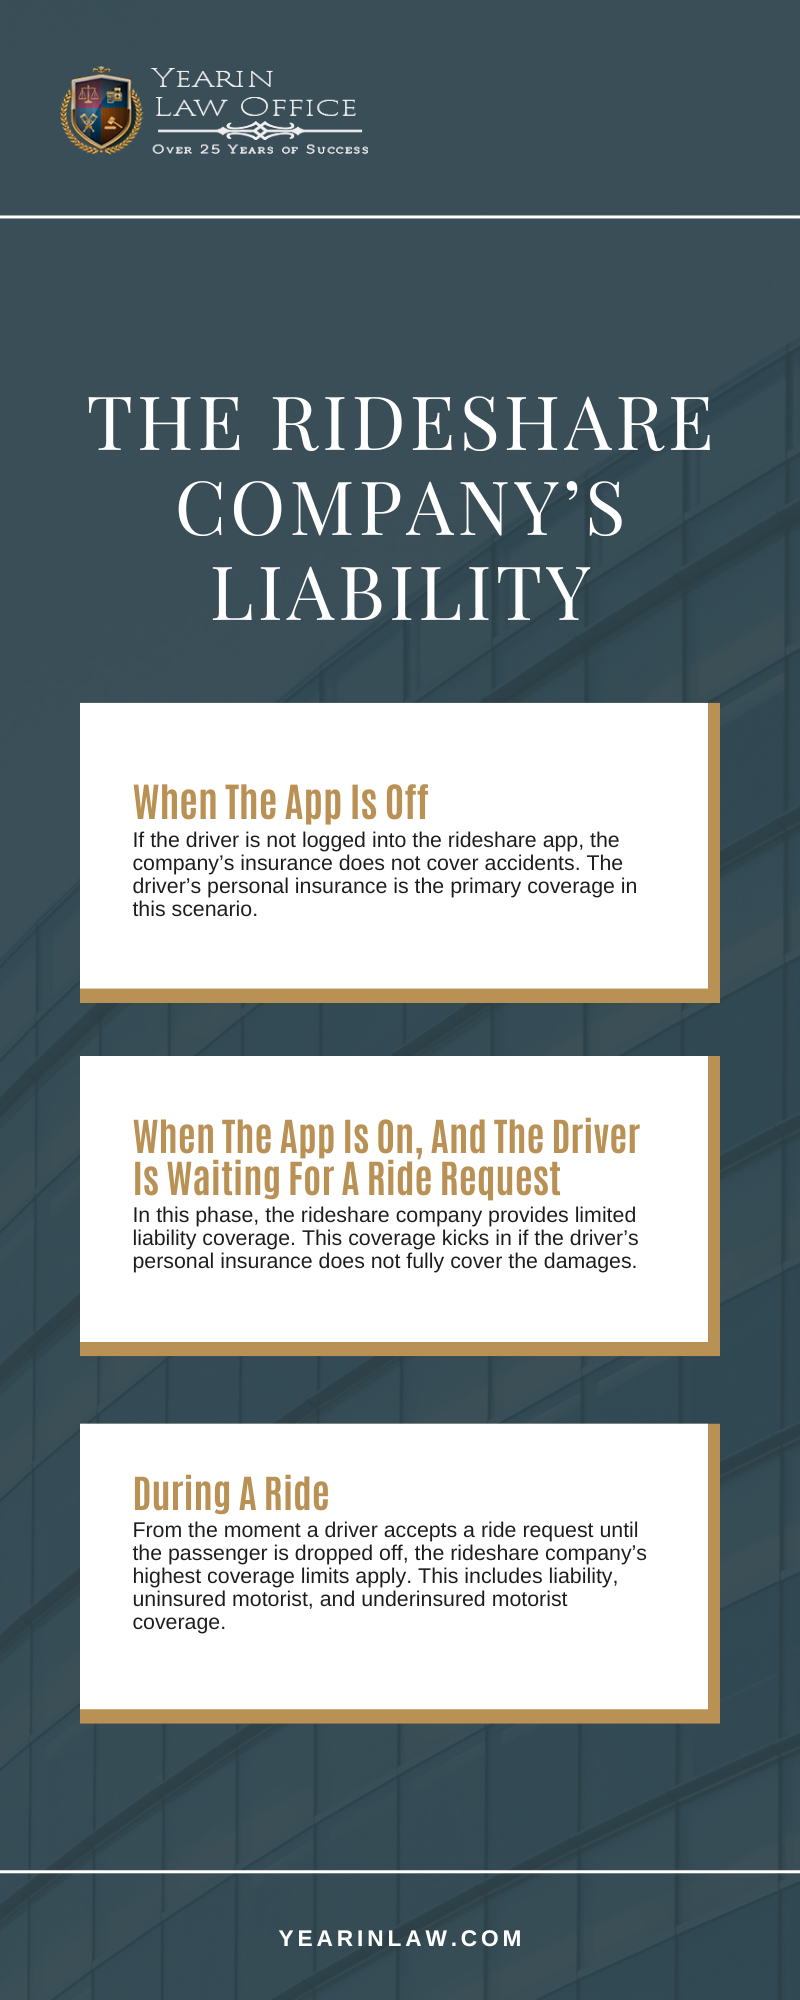 The Rideshare Company's Liability Infographic